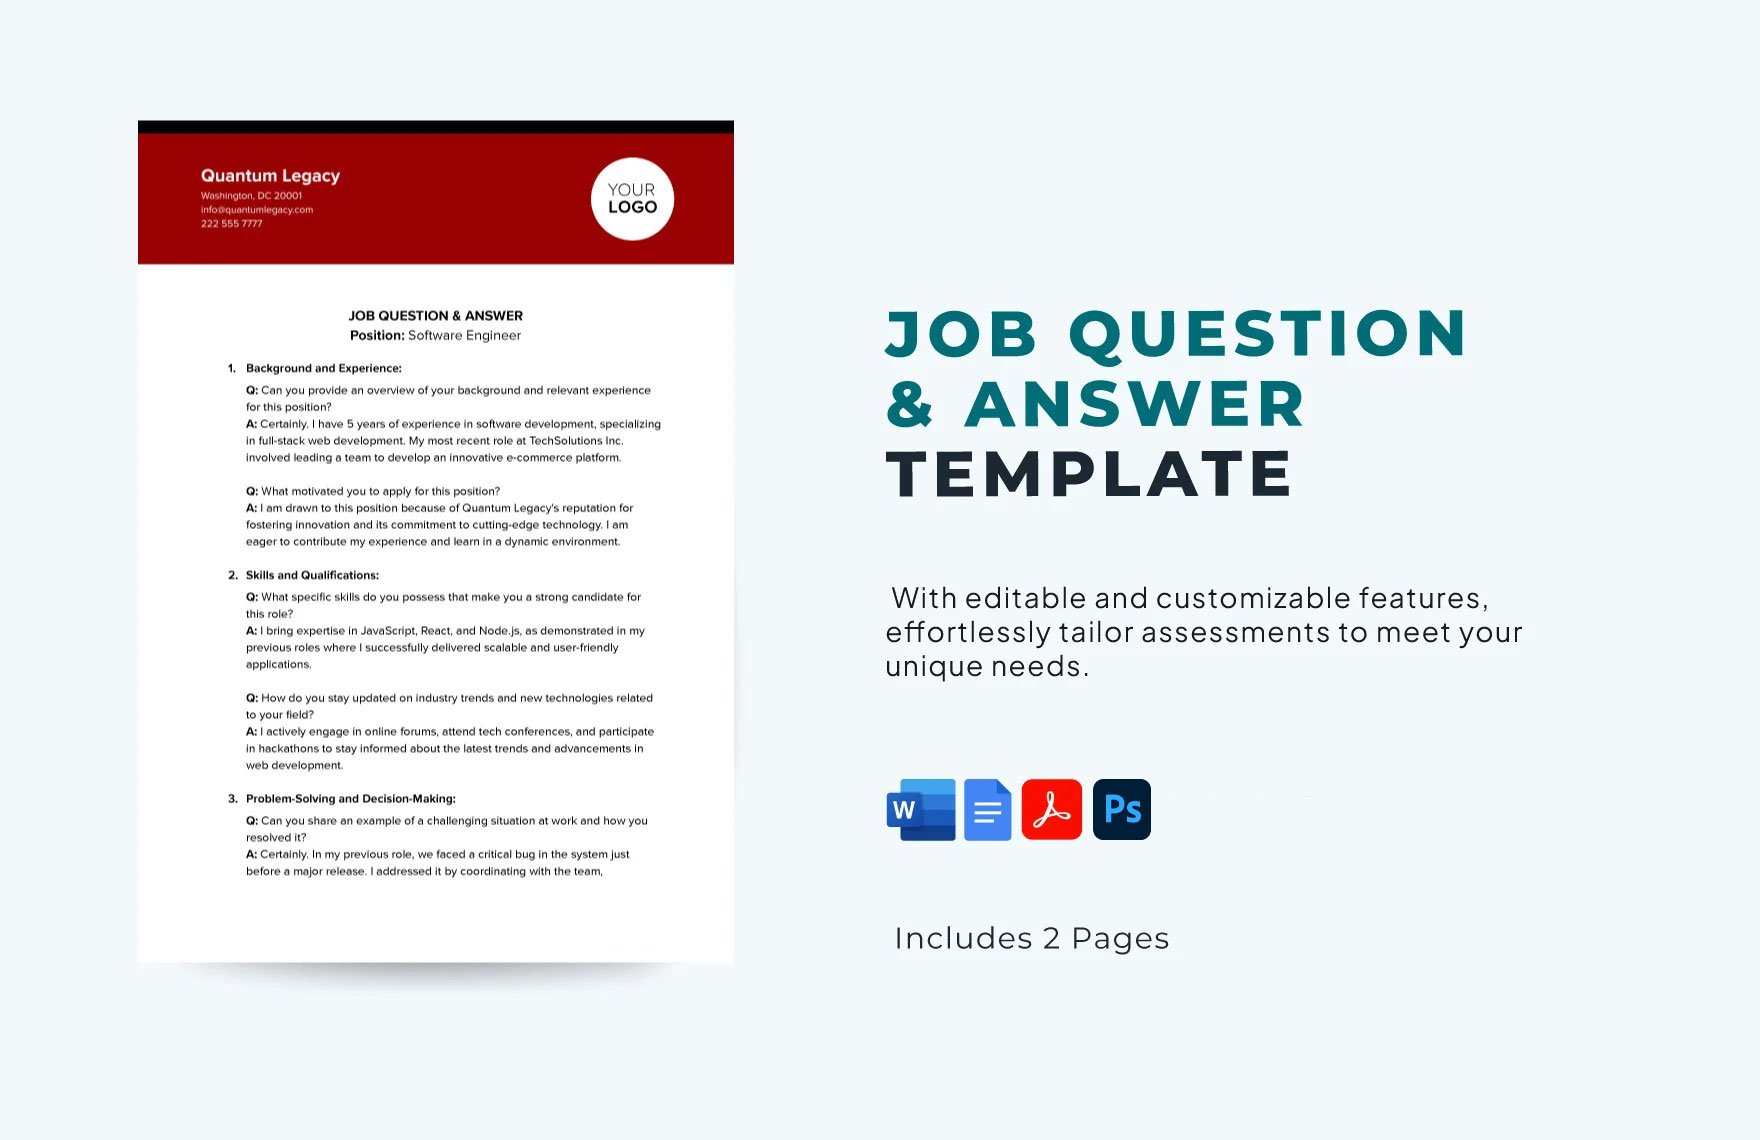 Job Question & Answer Template